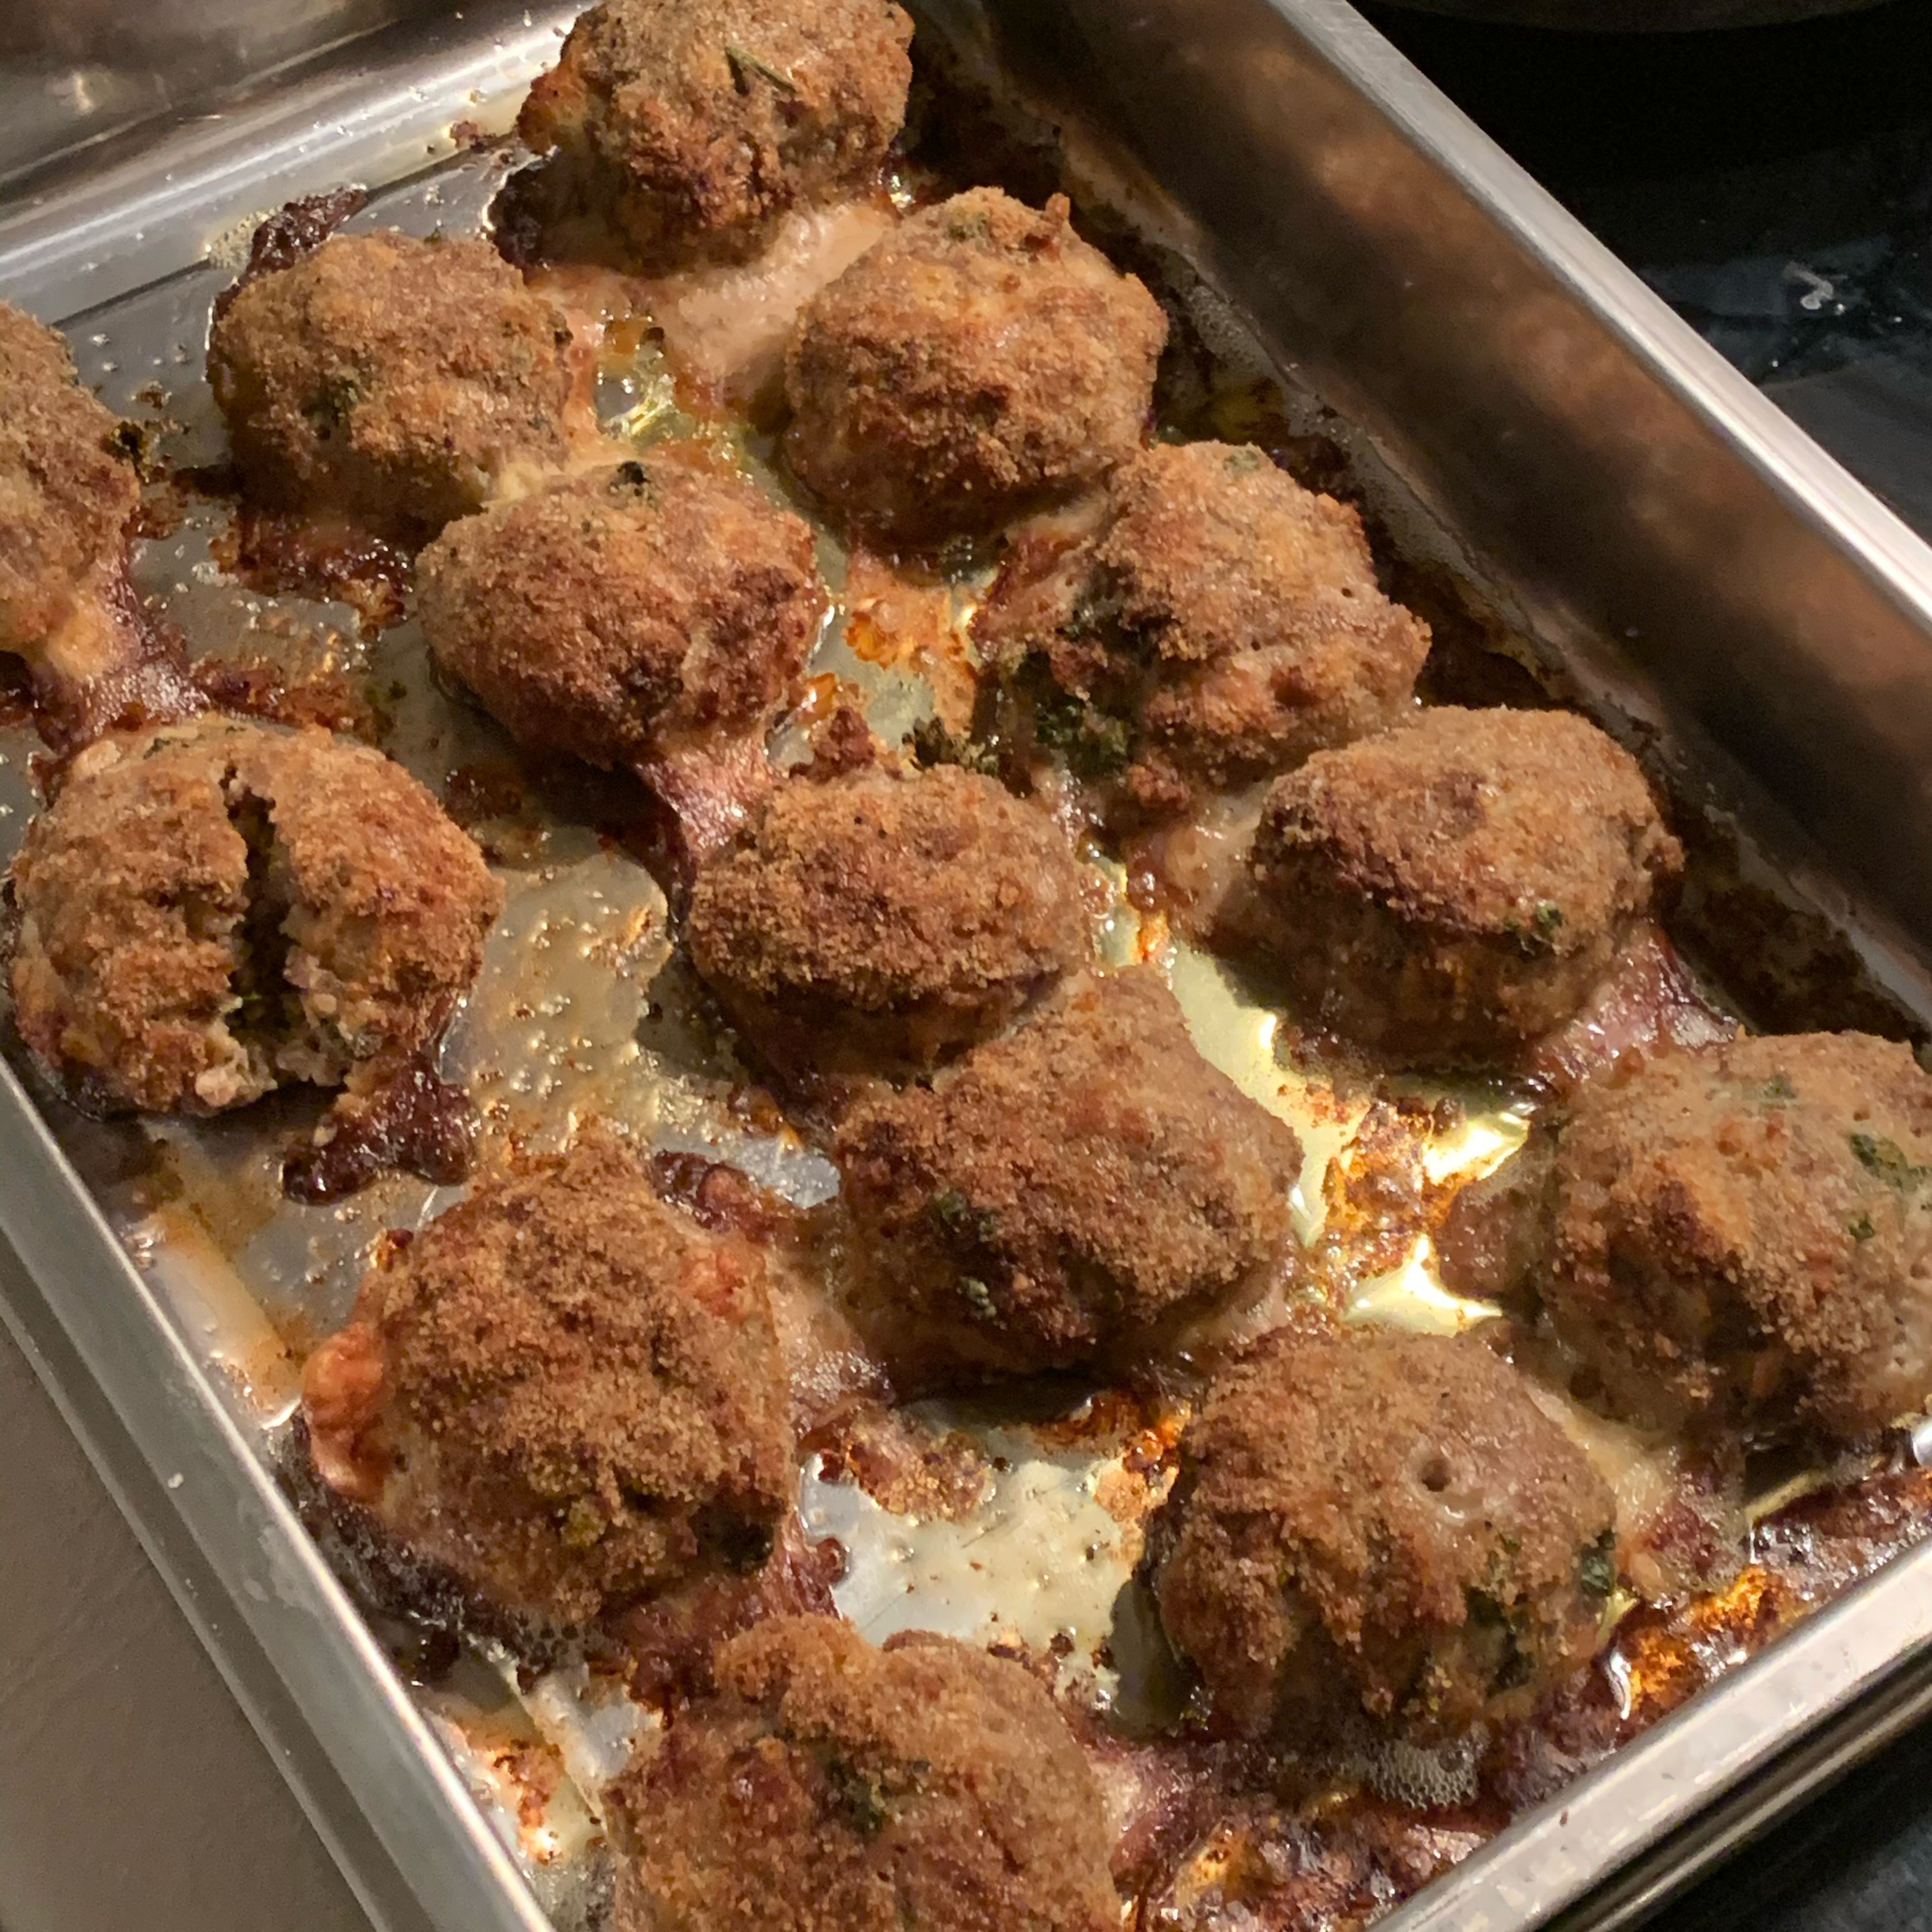 Remove the polpette from the oven and let them rest for just a couple of minutes.  Serve them while still hot with some veggie side 🥗.